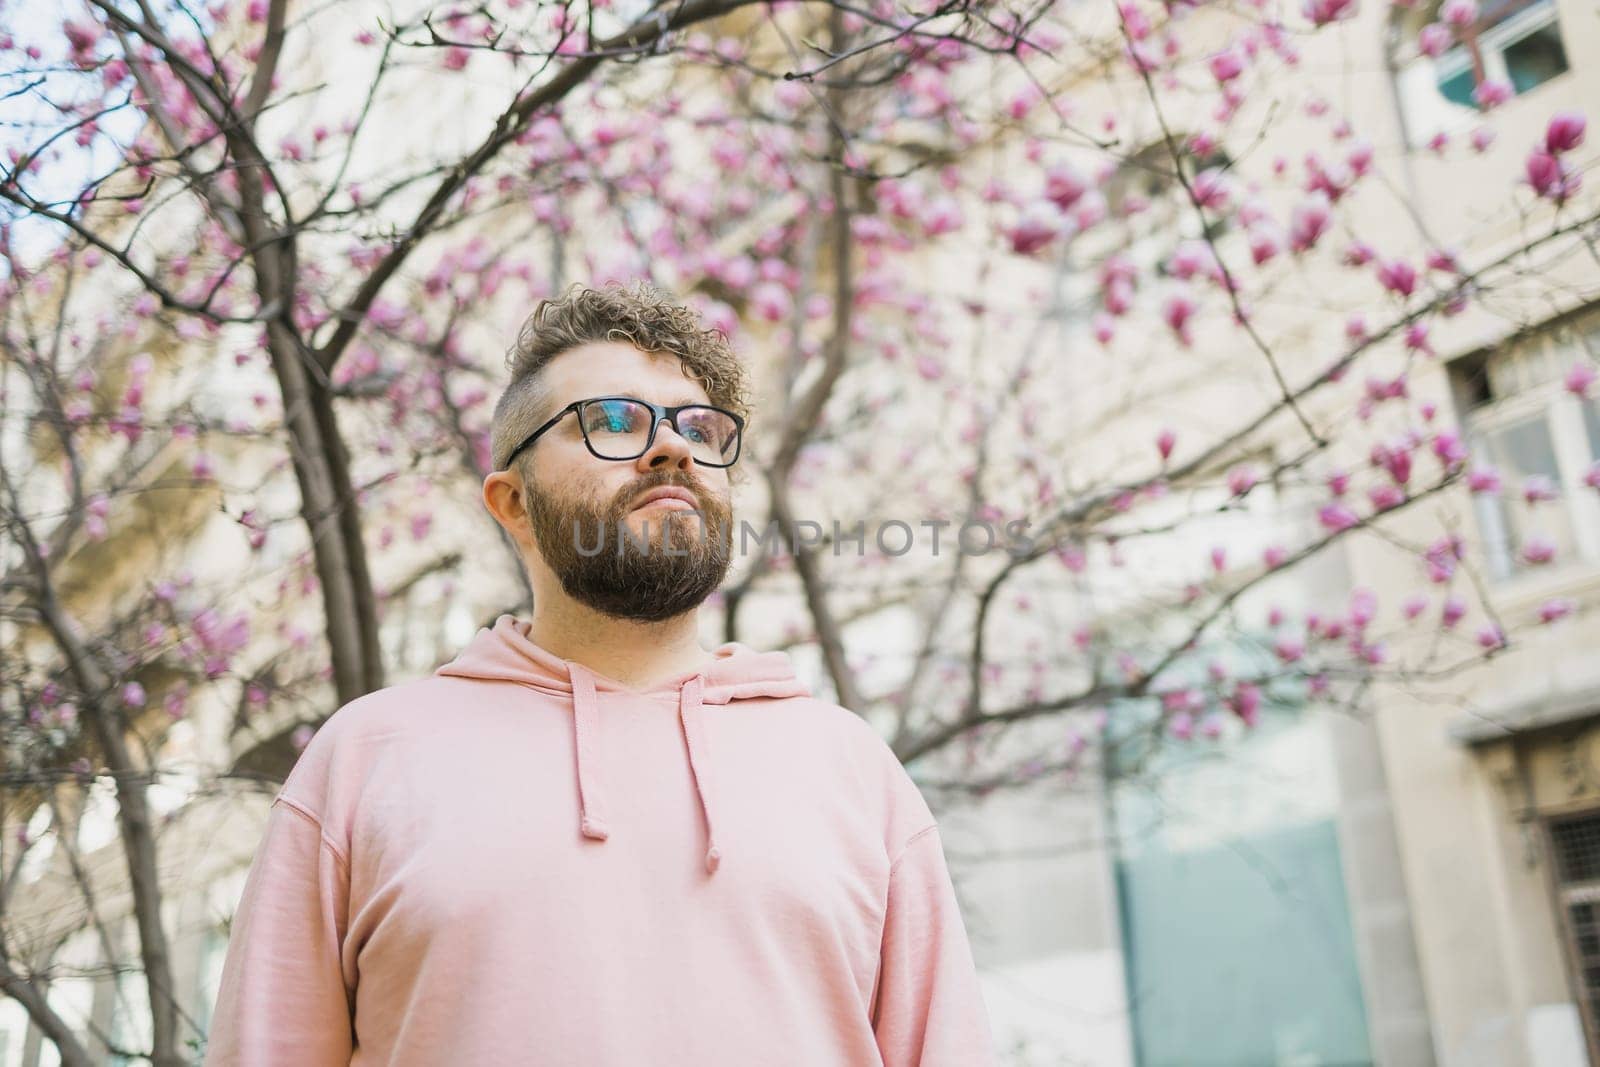 Spring fashion style. Male sexuality. Bearded man portrait on blooming flower tree background. Enjoy good weather springtime. Copy space.